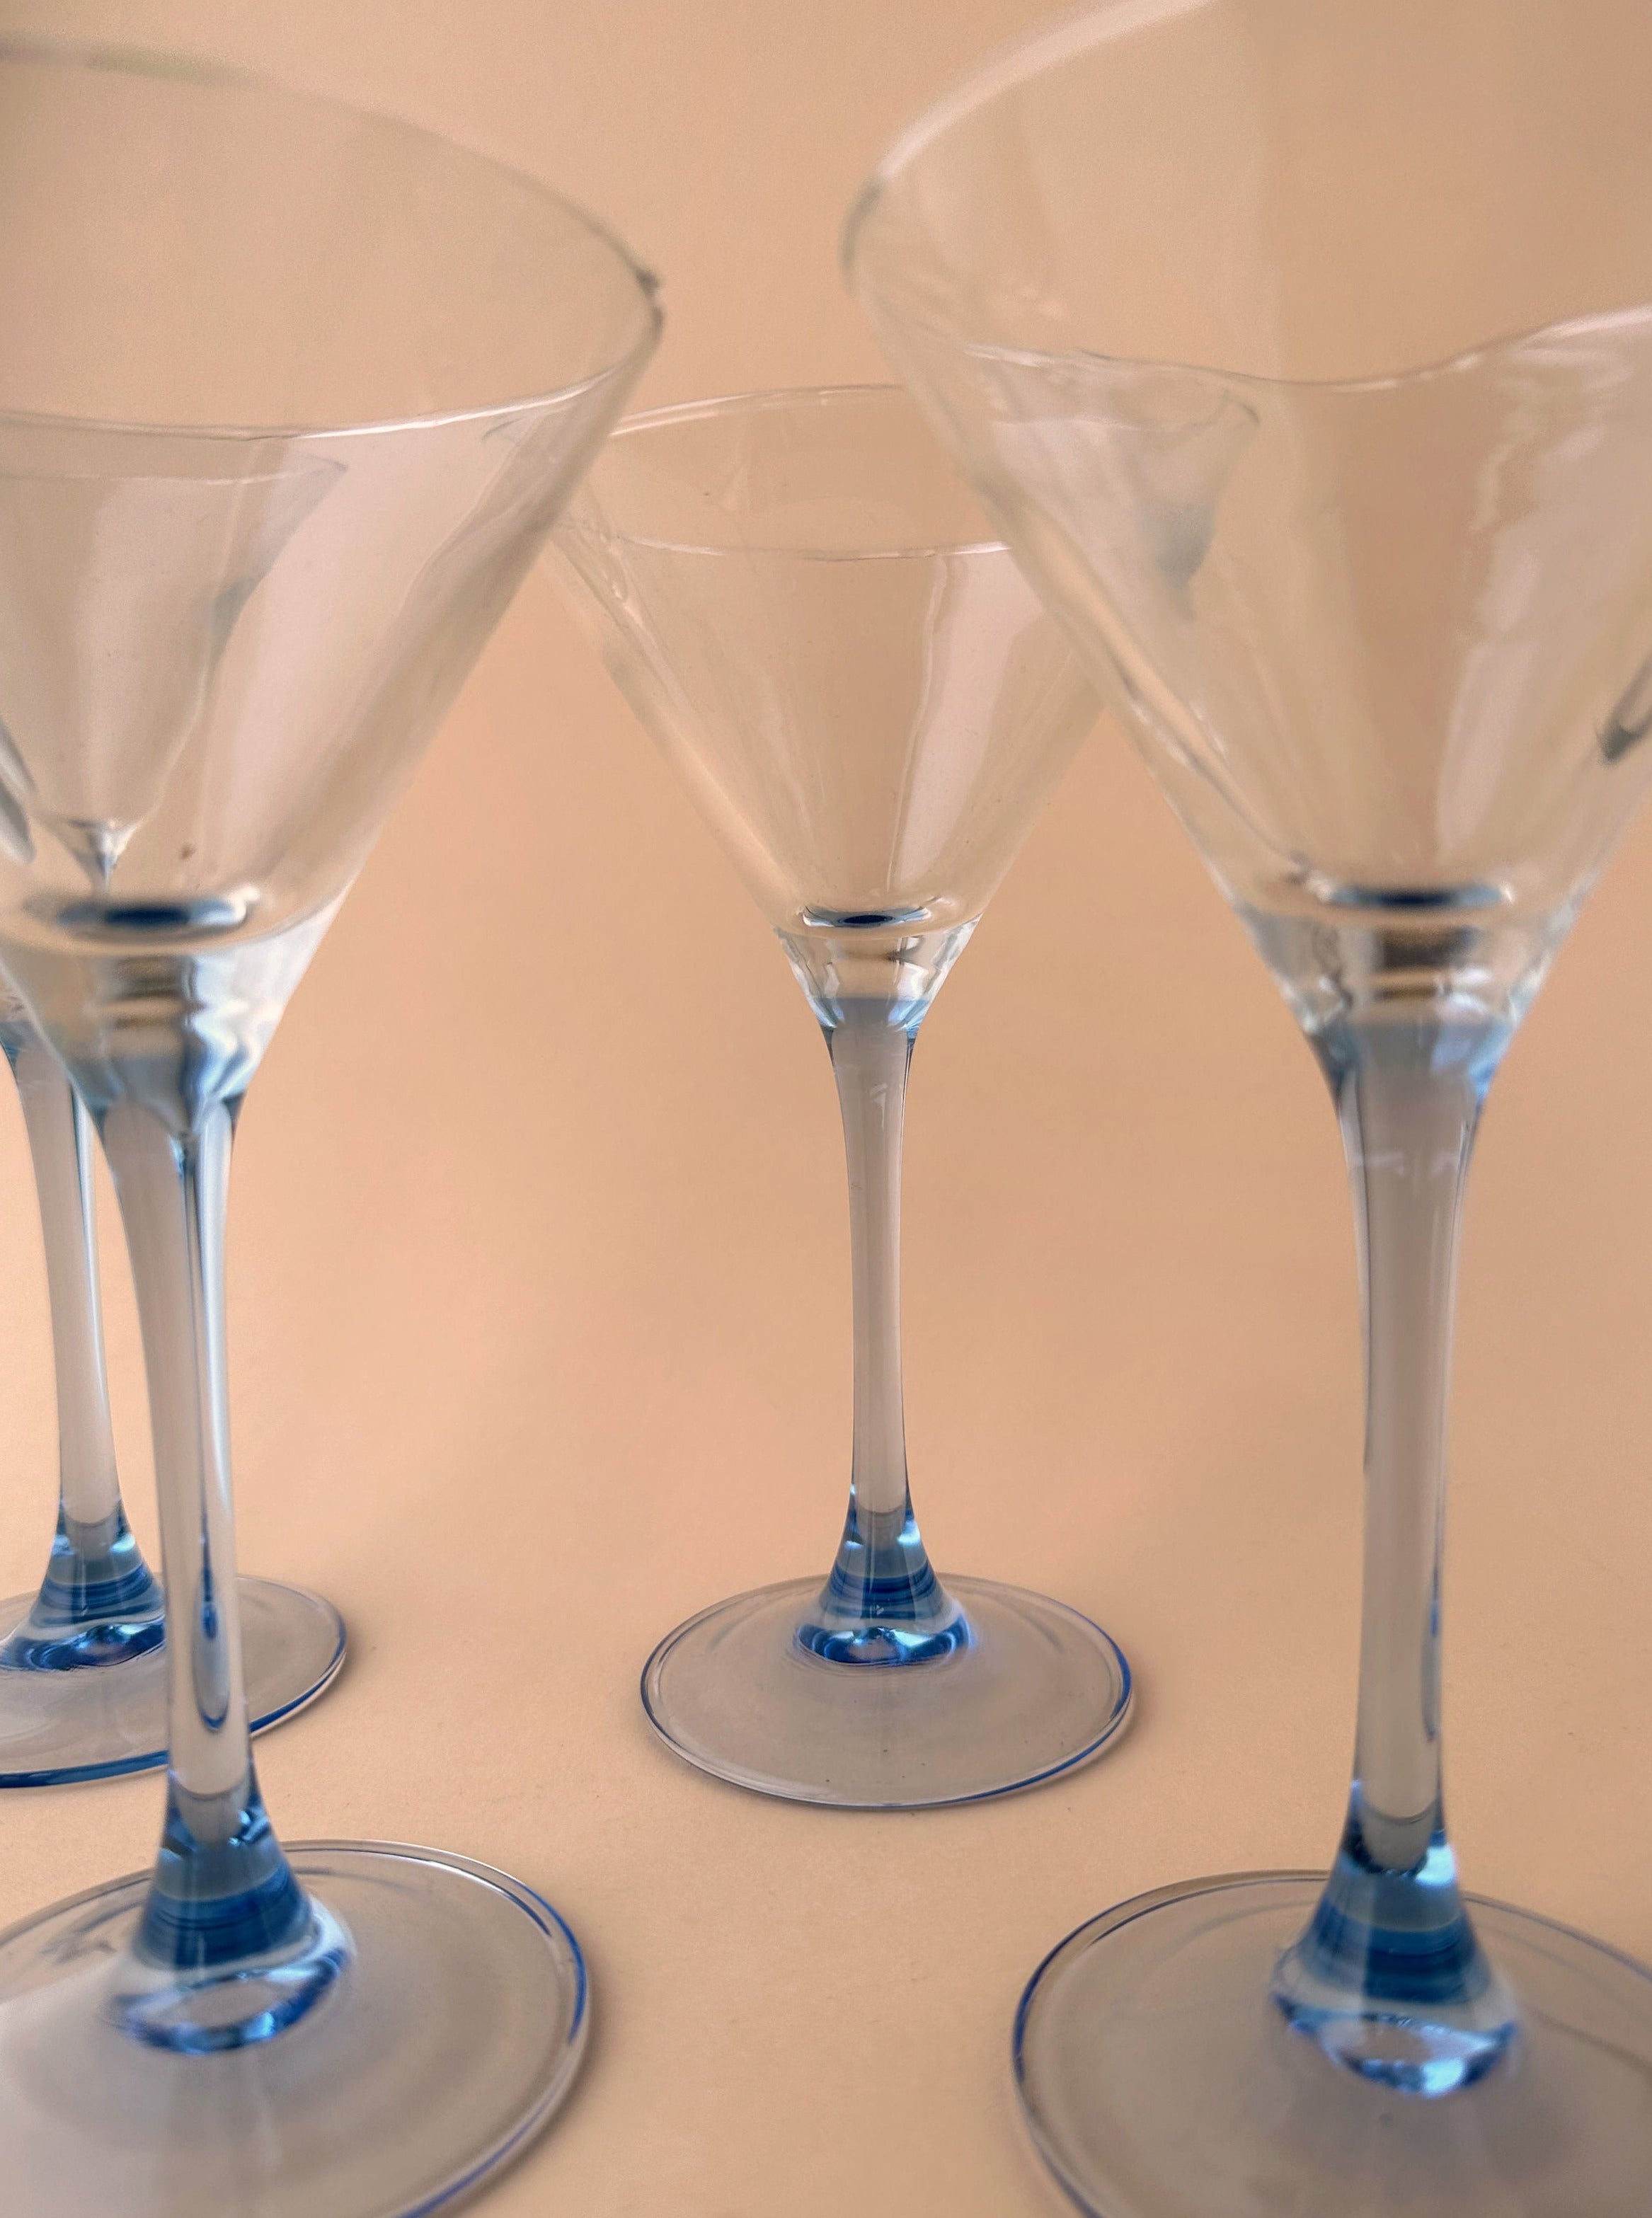 4 French Martini Glasses With Blue Stem